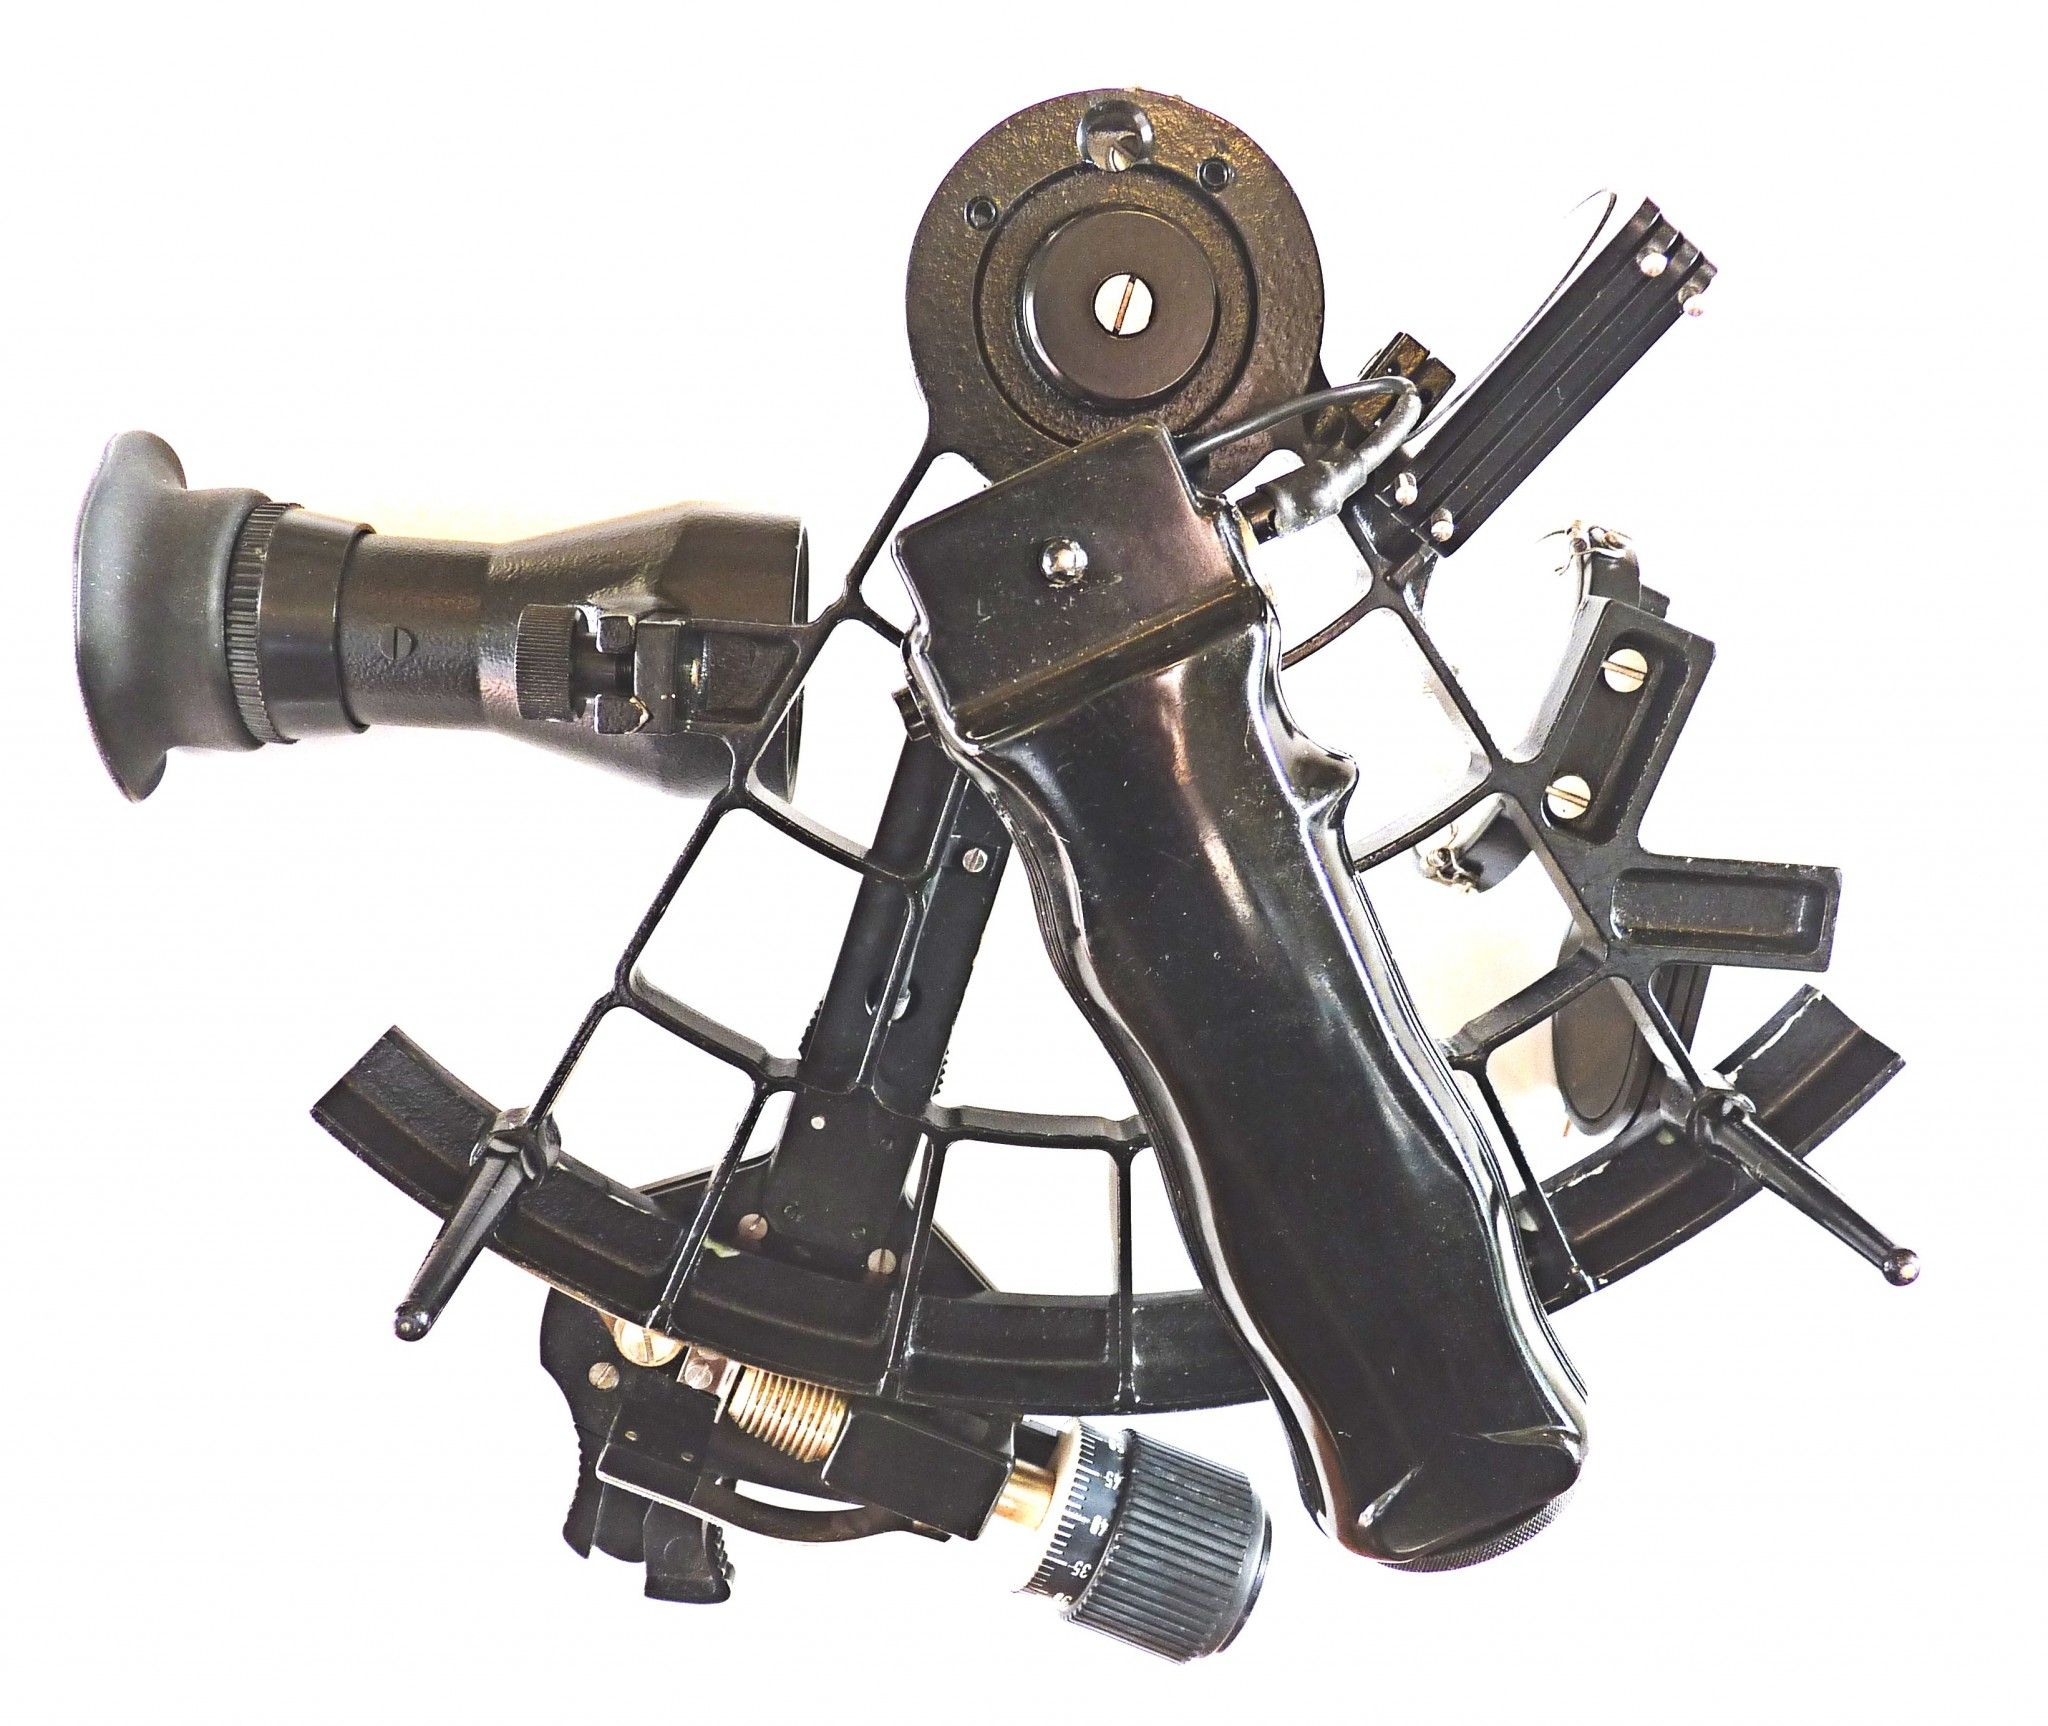 back of sextant with 4x40 scope mounted image